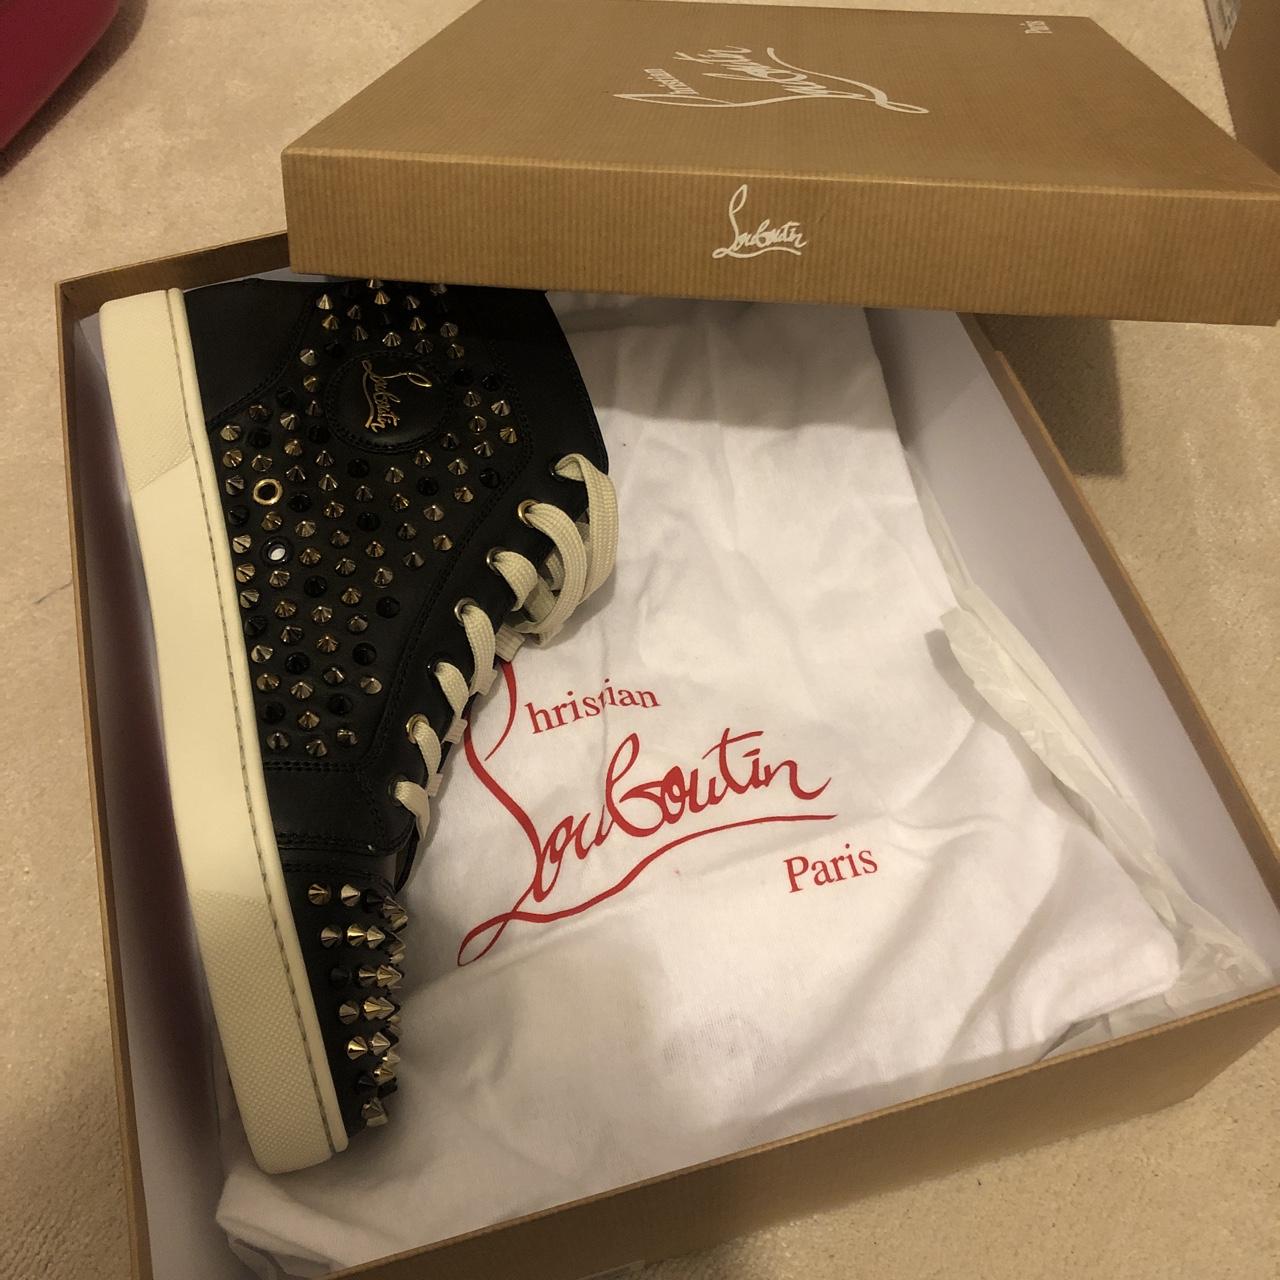 Christian Louboutin Slip-on Used Rep Box Size 40.5 EU – SOLED OUT JC